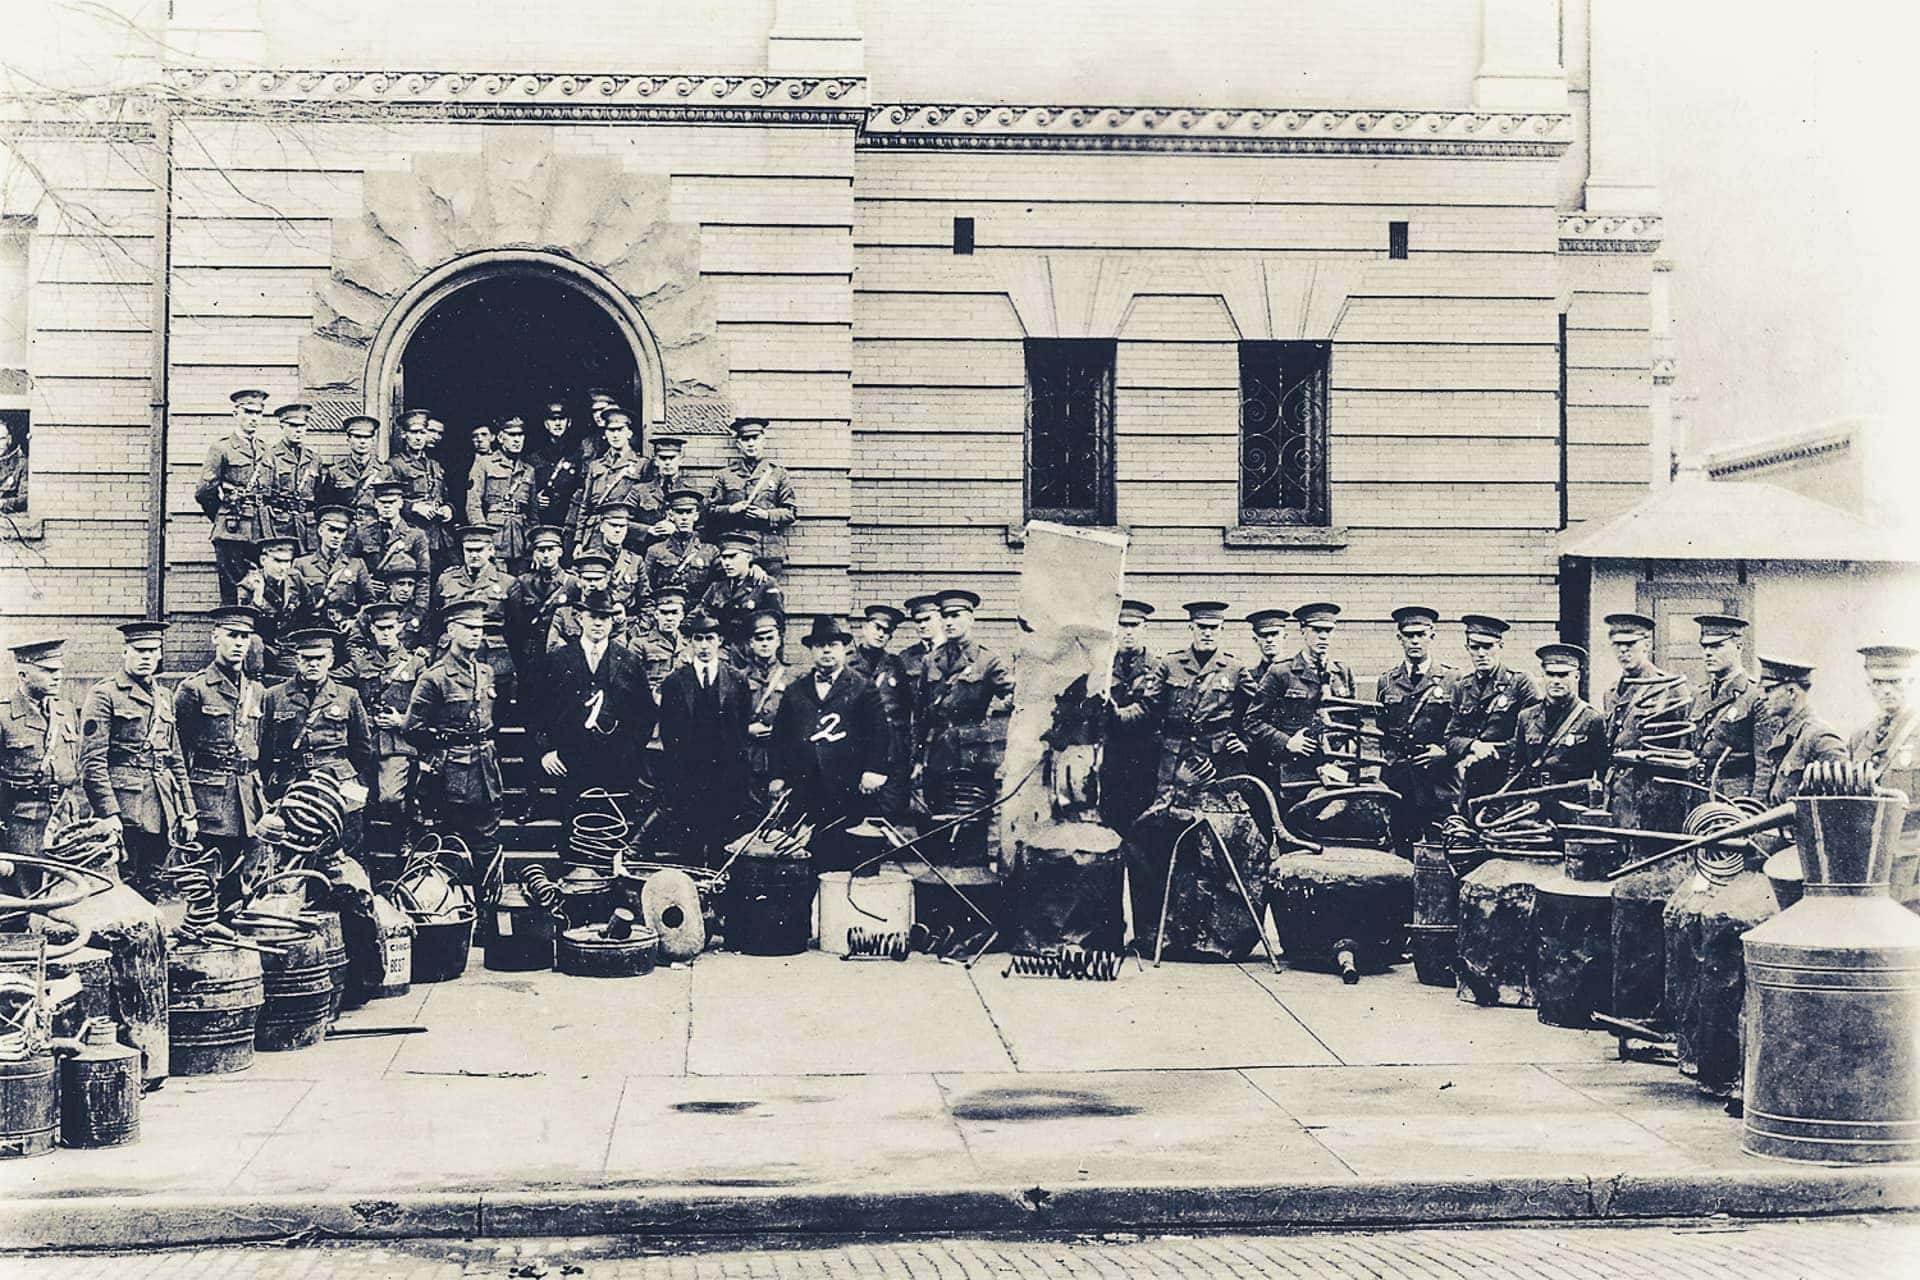 West Virginia State Police with a collection of confiscated stills at the old Mingo County courthouse.